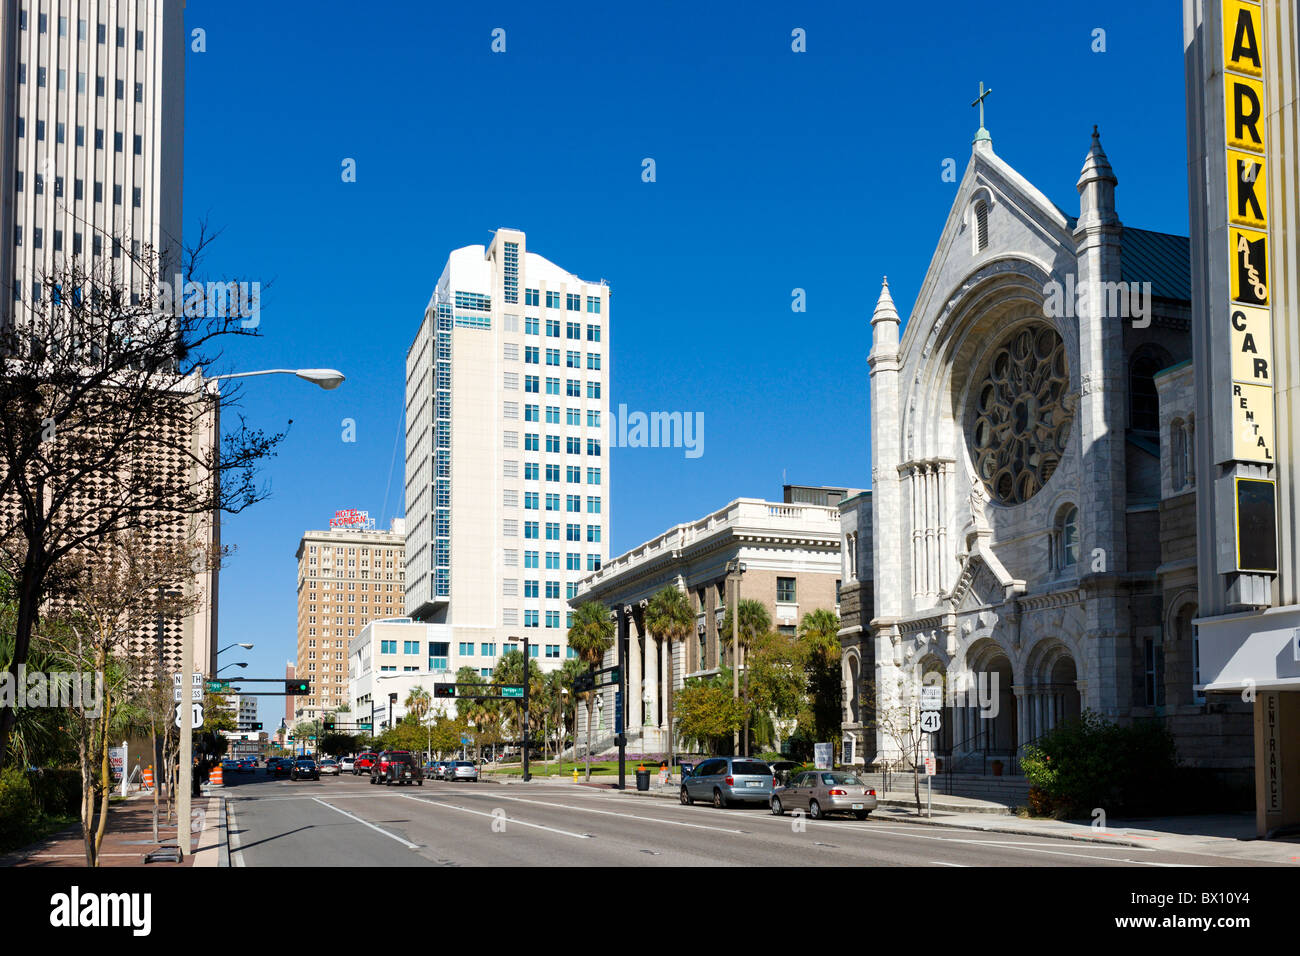 Florida Street in downtown with the Sacred Heart Church and the Old Federal Courthouse, Tampa, Florida, USA Stock Photo